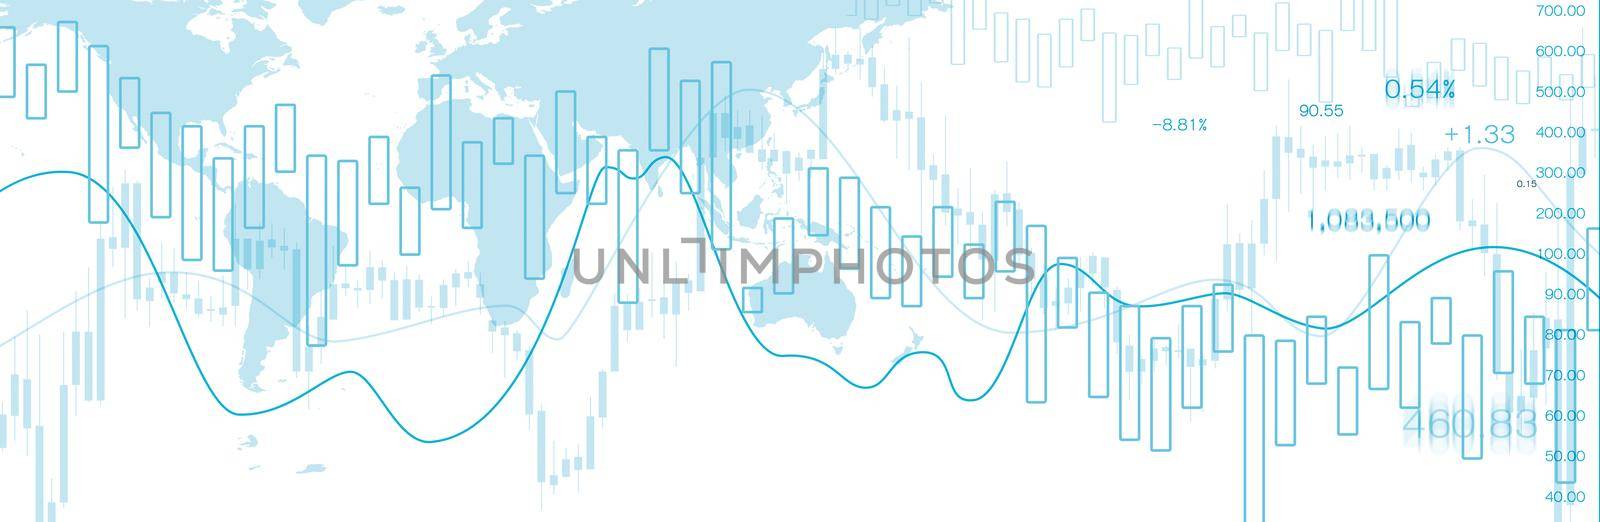 Stock market graph or forex trading chart for business and financial concepts. Abstract finance background investment or Economic trends business idea. Stock market data. illustration. by thanumporn